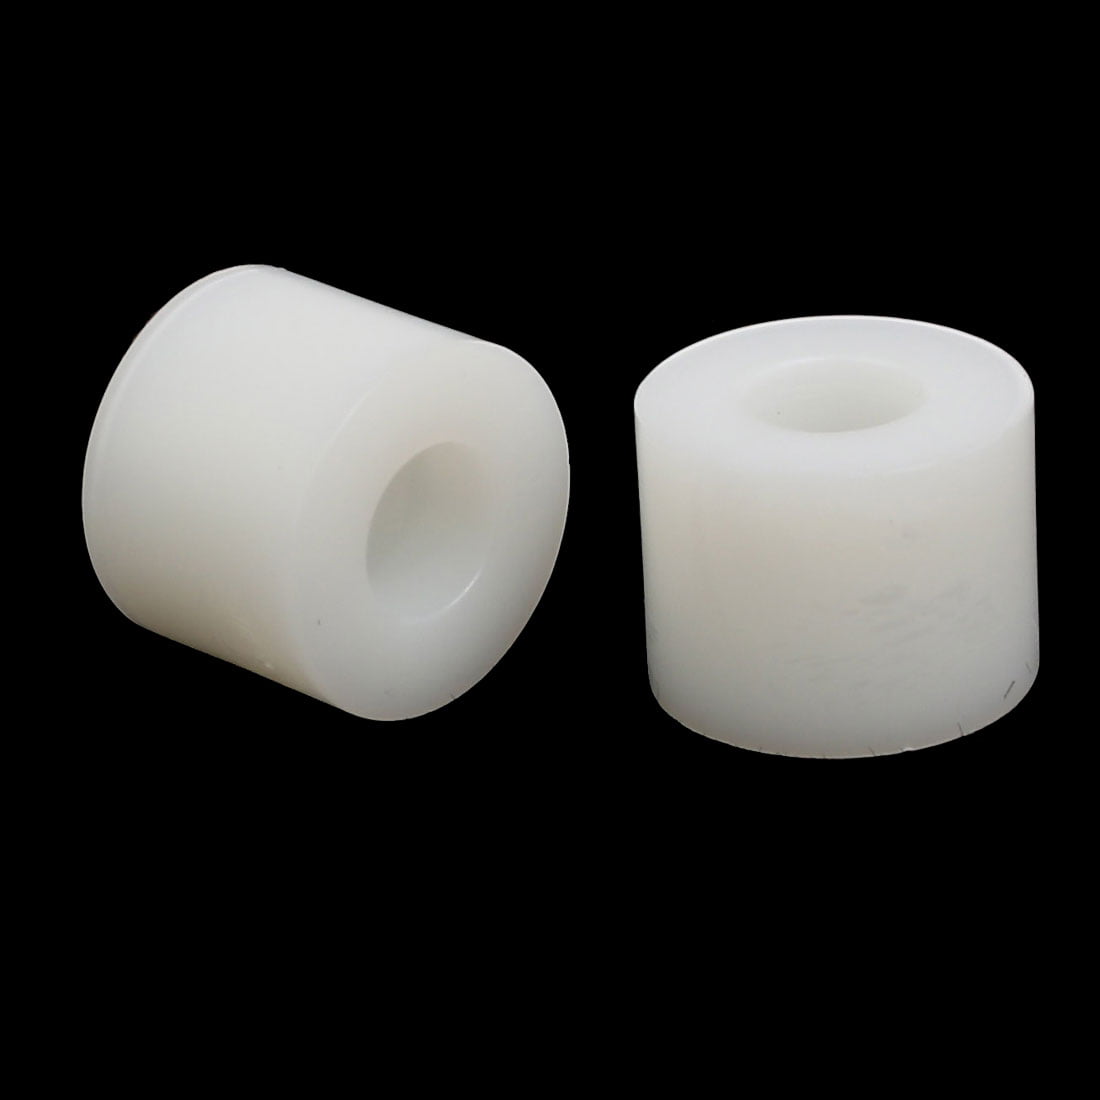 9mmx11mm Plastic Non-threaded Column Standoff Support Spacer Washer White 12pcs 